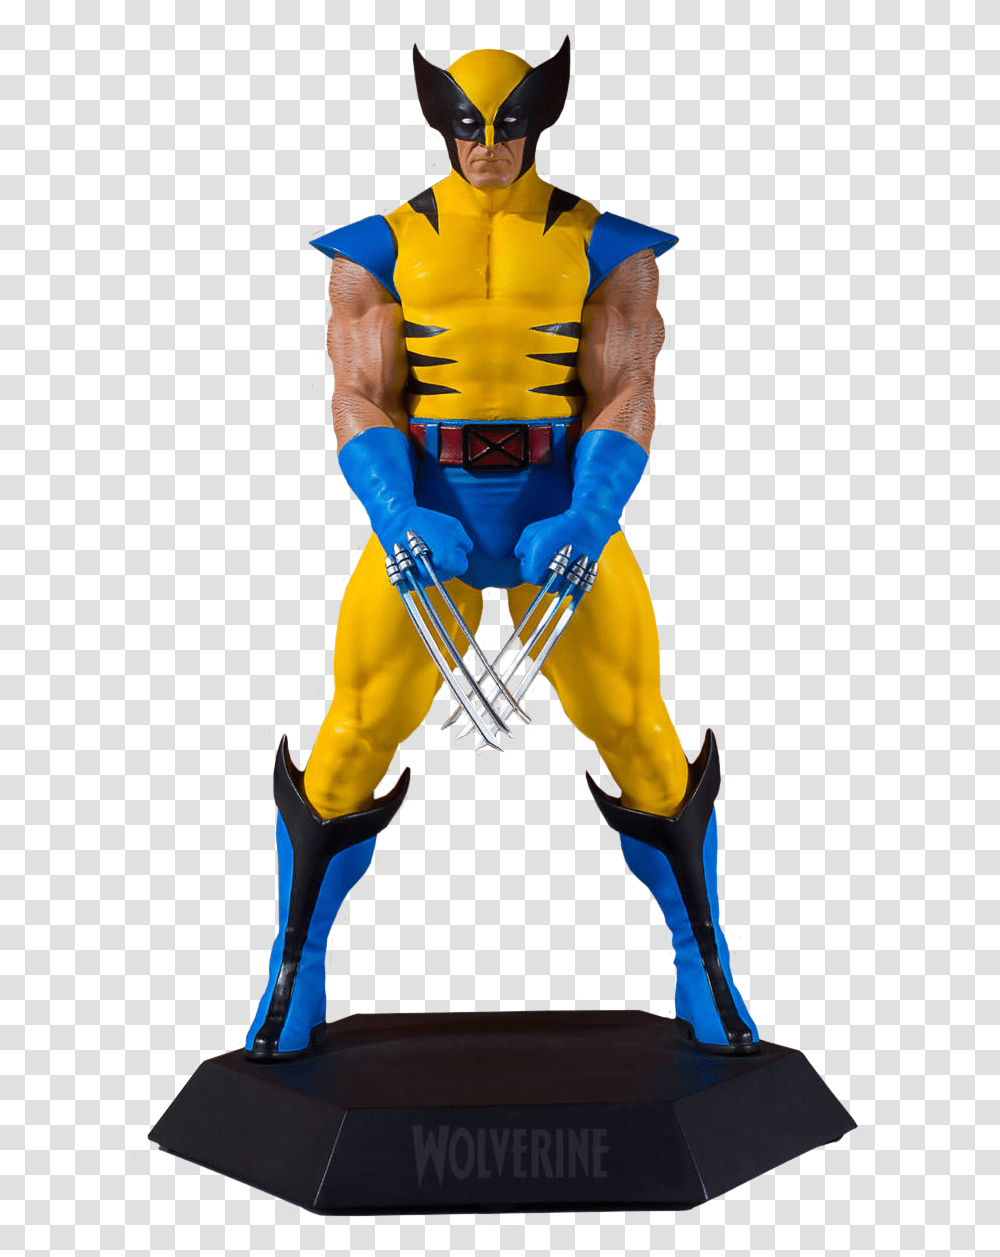 Gentle Giant Wolverine Statue, Person, Hand, People Transparent Png